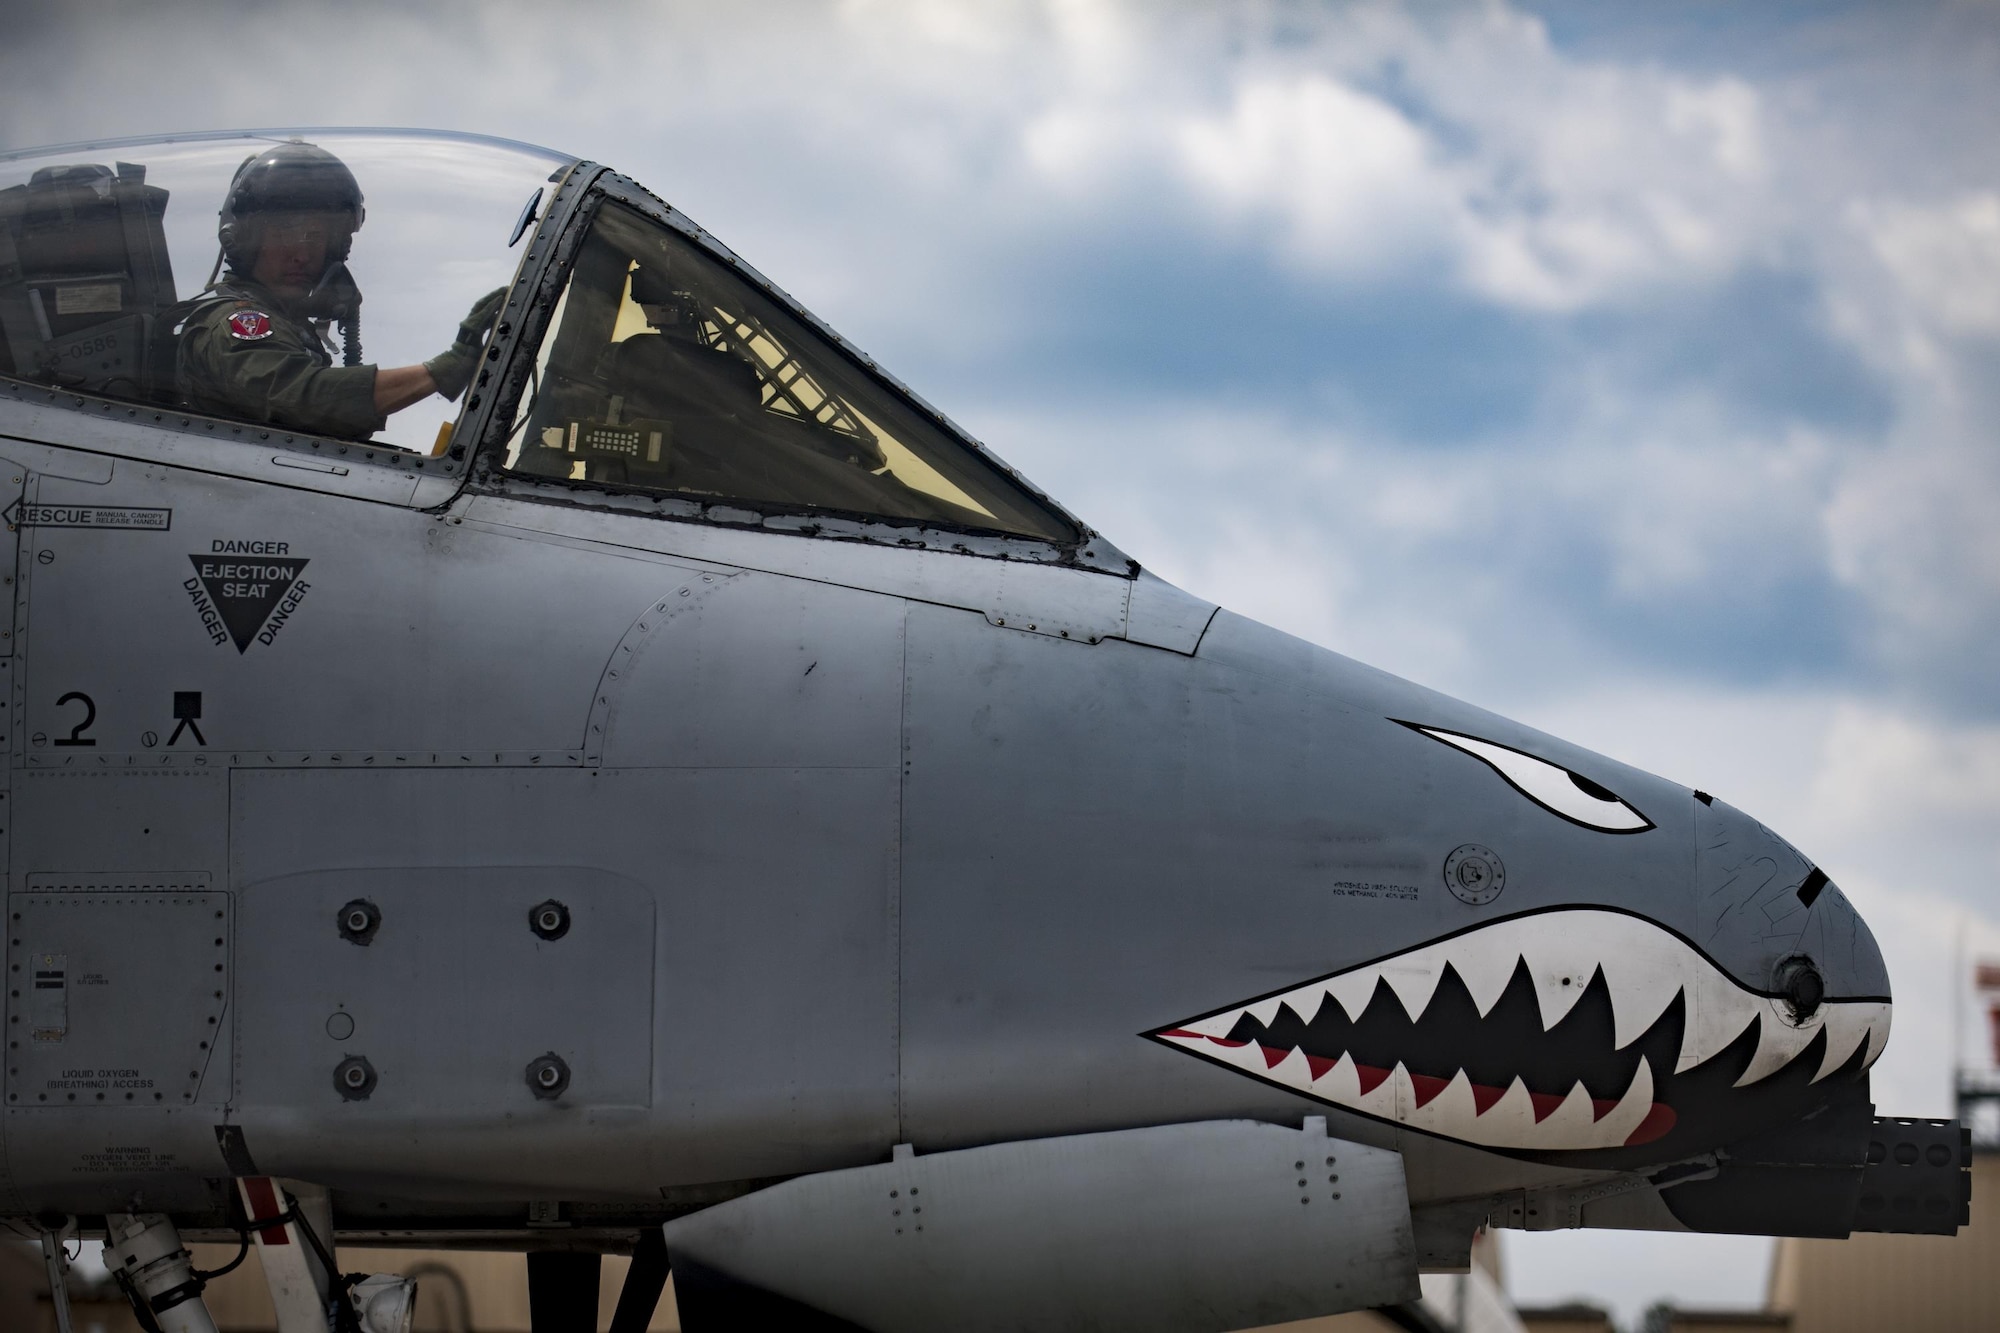 U.S. Air Force Reserve Maj. Matt Paetzhold, 76th Fighter Squadron A-10C Thunderbolt II instructor pilot, taxis an A-10, Sept. 9, 2017, at Moody Air Force Base, Ga. After graduating the Weapons Instructor Course, Paetzhold joined the Airmen who serve as tactical and operational advisors to military leaders at all levels. Due to the relationship between the 75th FS and 76th FS, Paetzhold is slated to deploy as the 75th FSs weapons officer. (U.S. Air Force photo by Senior Airman Daniel Snider)